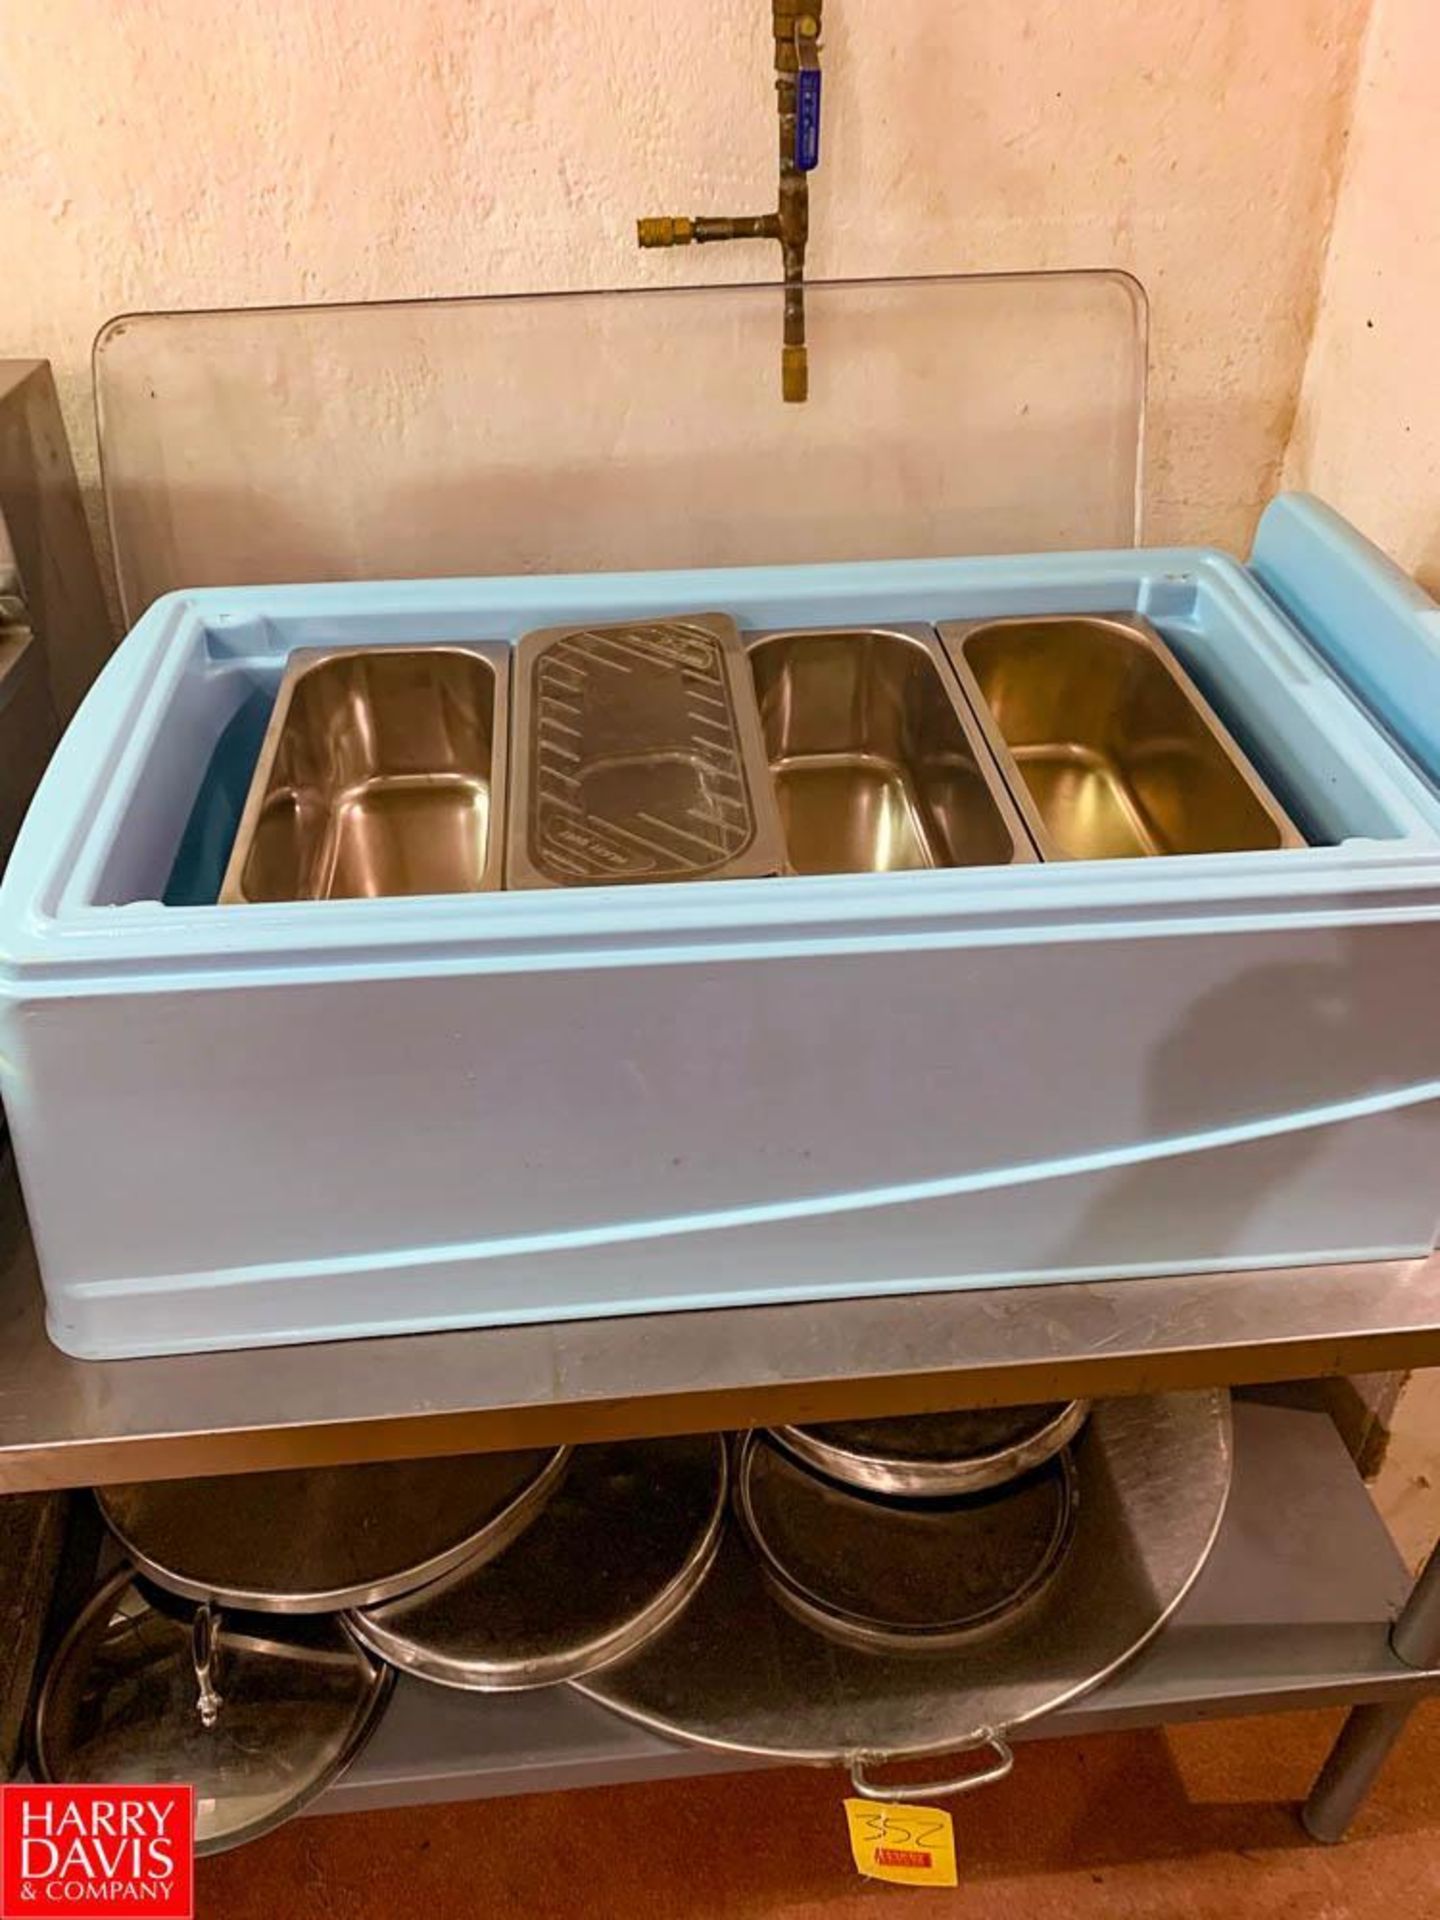 Silver King S/S Ice Cream Display Freezer and Plastic 3rd Pan Holder with (4) S/S 3rd Pans - Rigging - Image 2 of 3